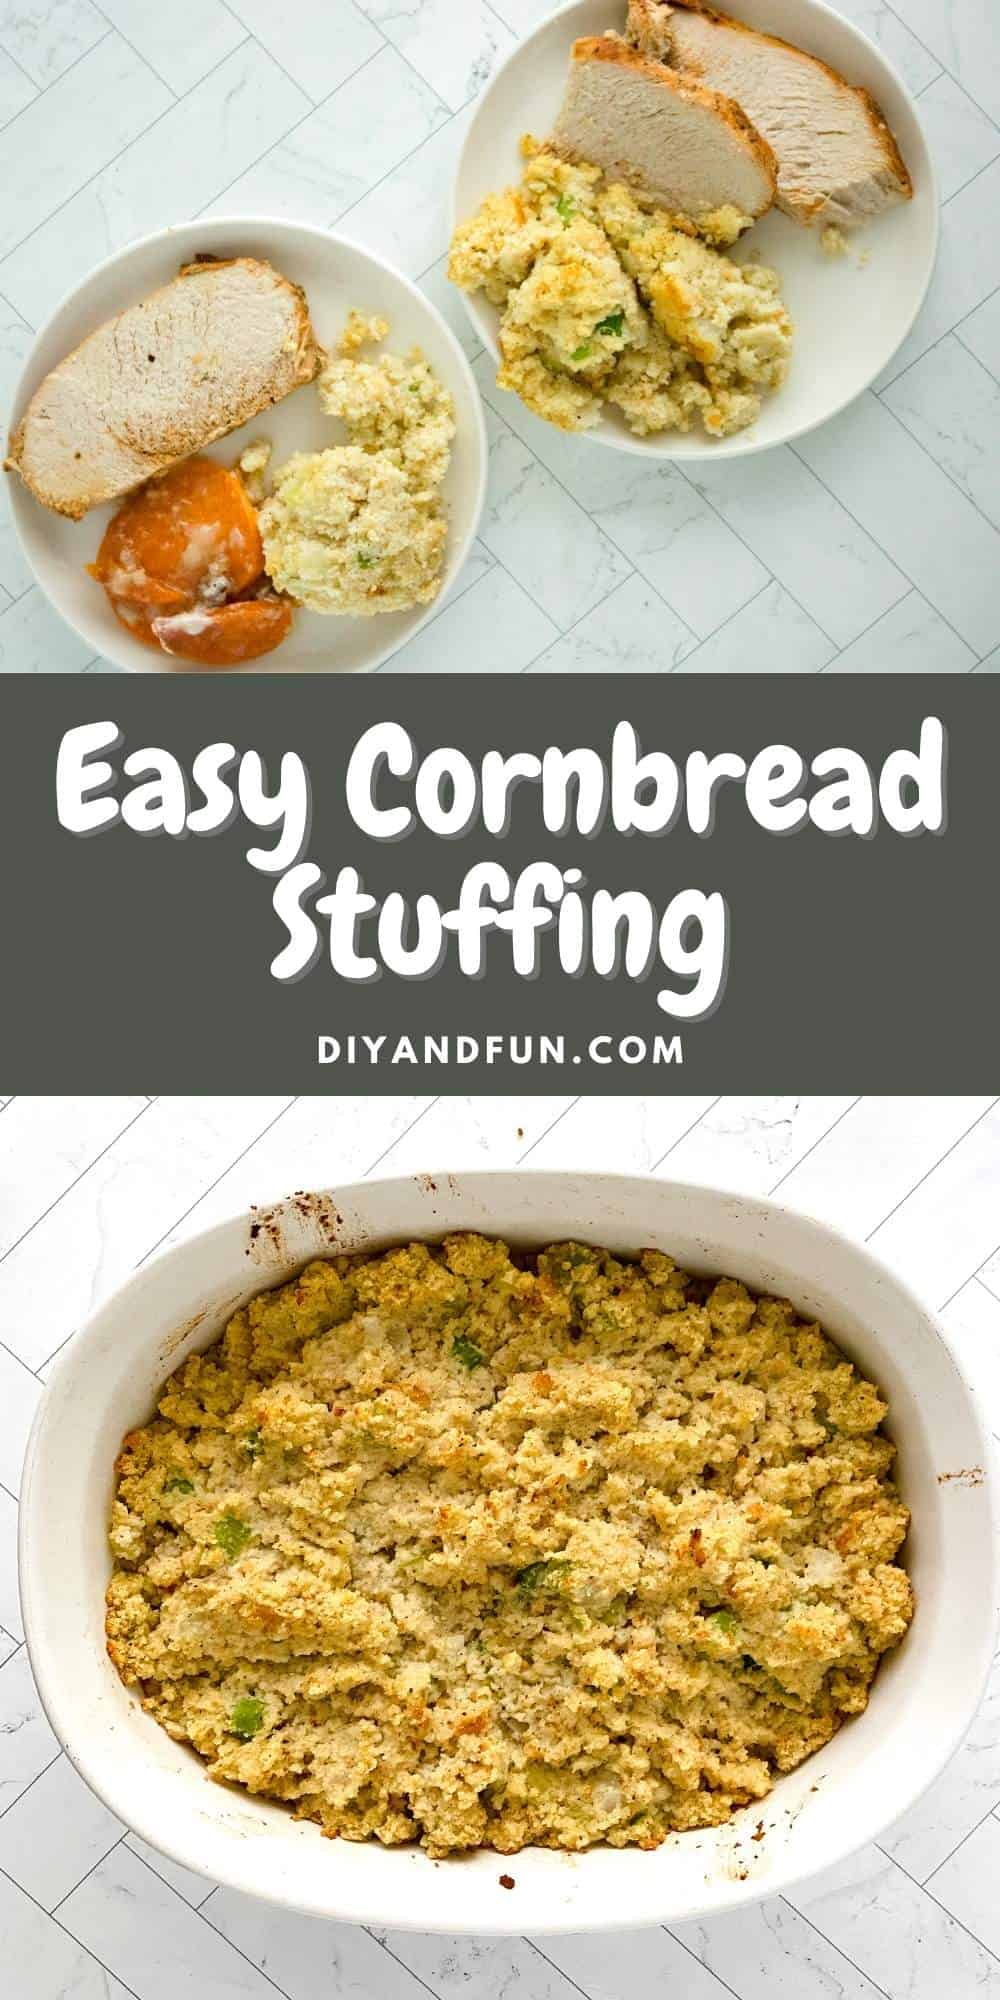 Easy Homemade Cornbread Stuffing, a classic Thanksgiving or Christmas southern inspired side dish recipe that tastes great!